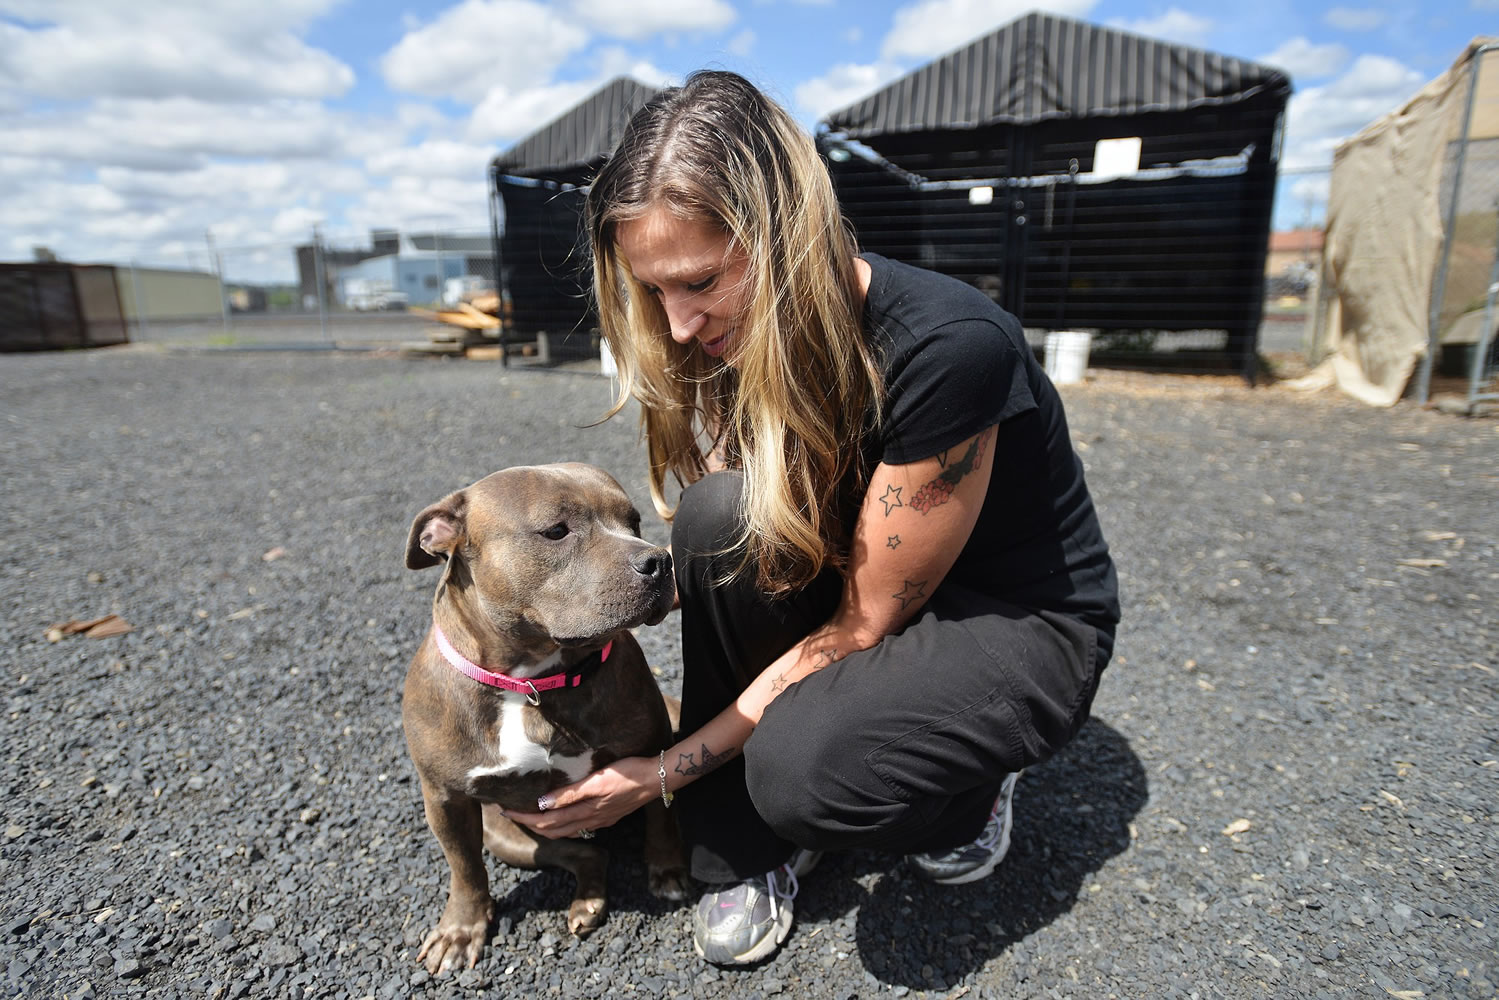 Crystal Sullenger, the manager for PAWS animal shelter in Pendleton, Ore., pets her pit bull, Star, on Thursday.